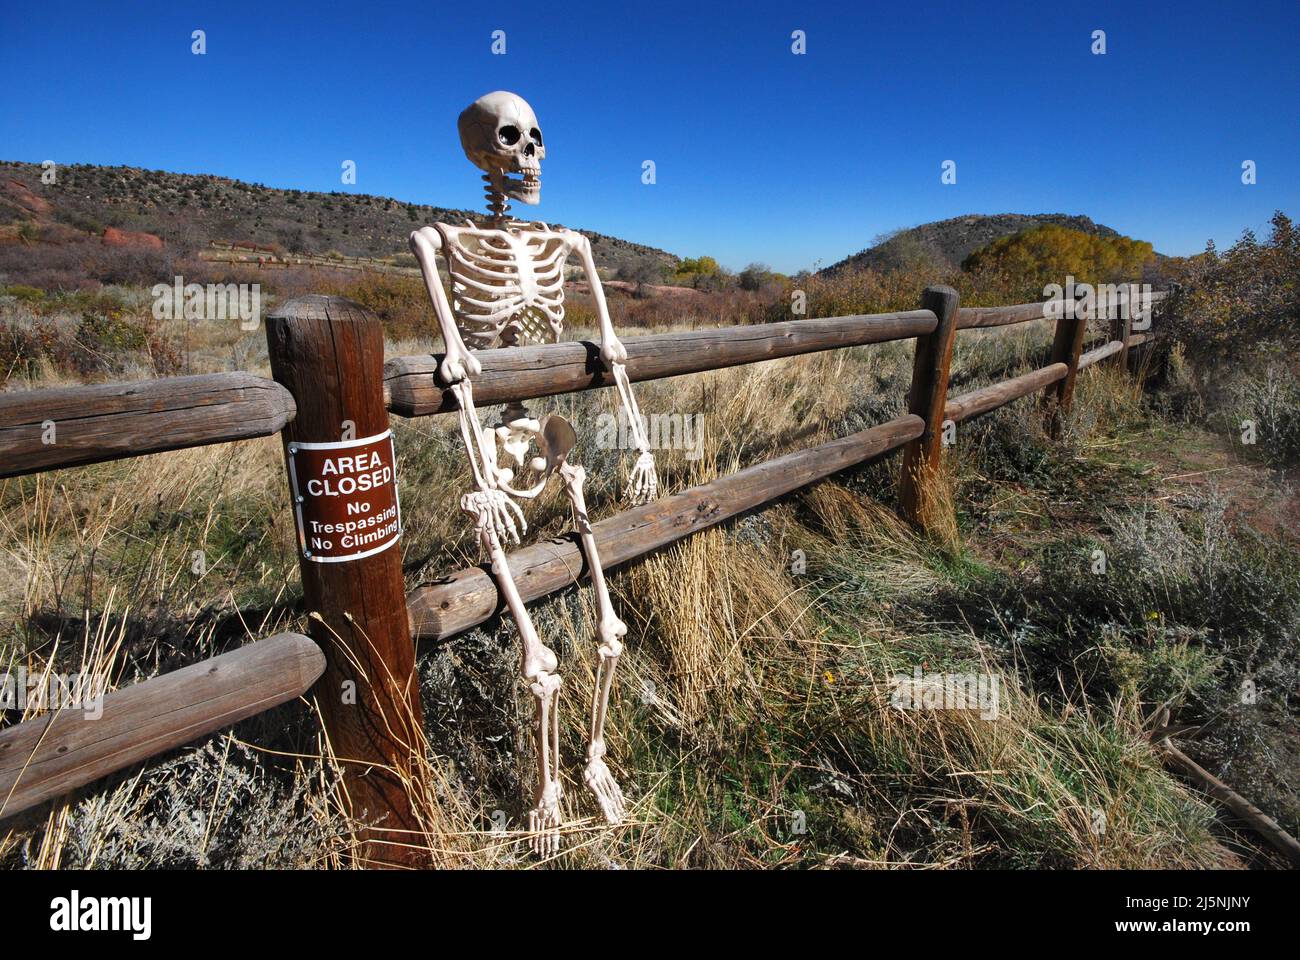 Skeleton resting on wooden pole rail fence in area closed to hikers next to no trespassers no climbing sign Stock Photo